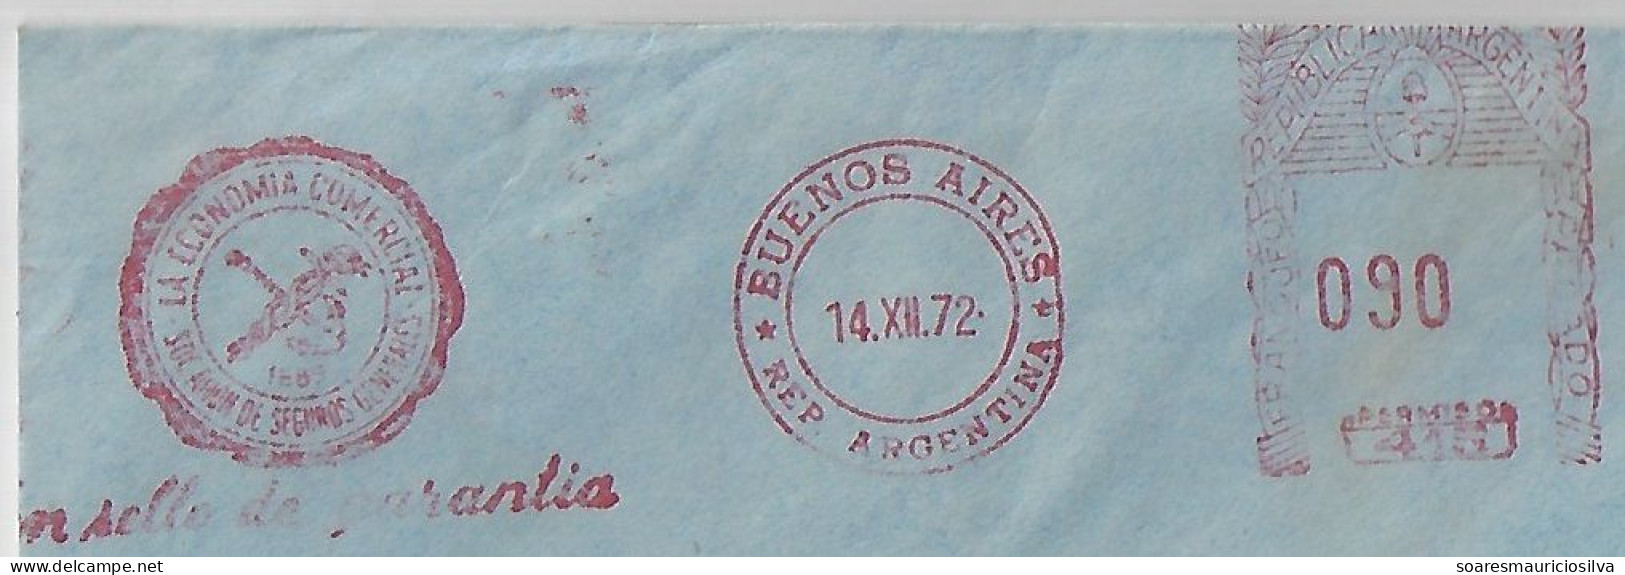 Argentina 1972 Cover Buenos Aires Obispo Trejo Meter Stamp Hasler Slogan Commercial Economy General Insurance Company - Covers & Documents